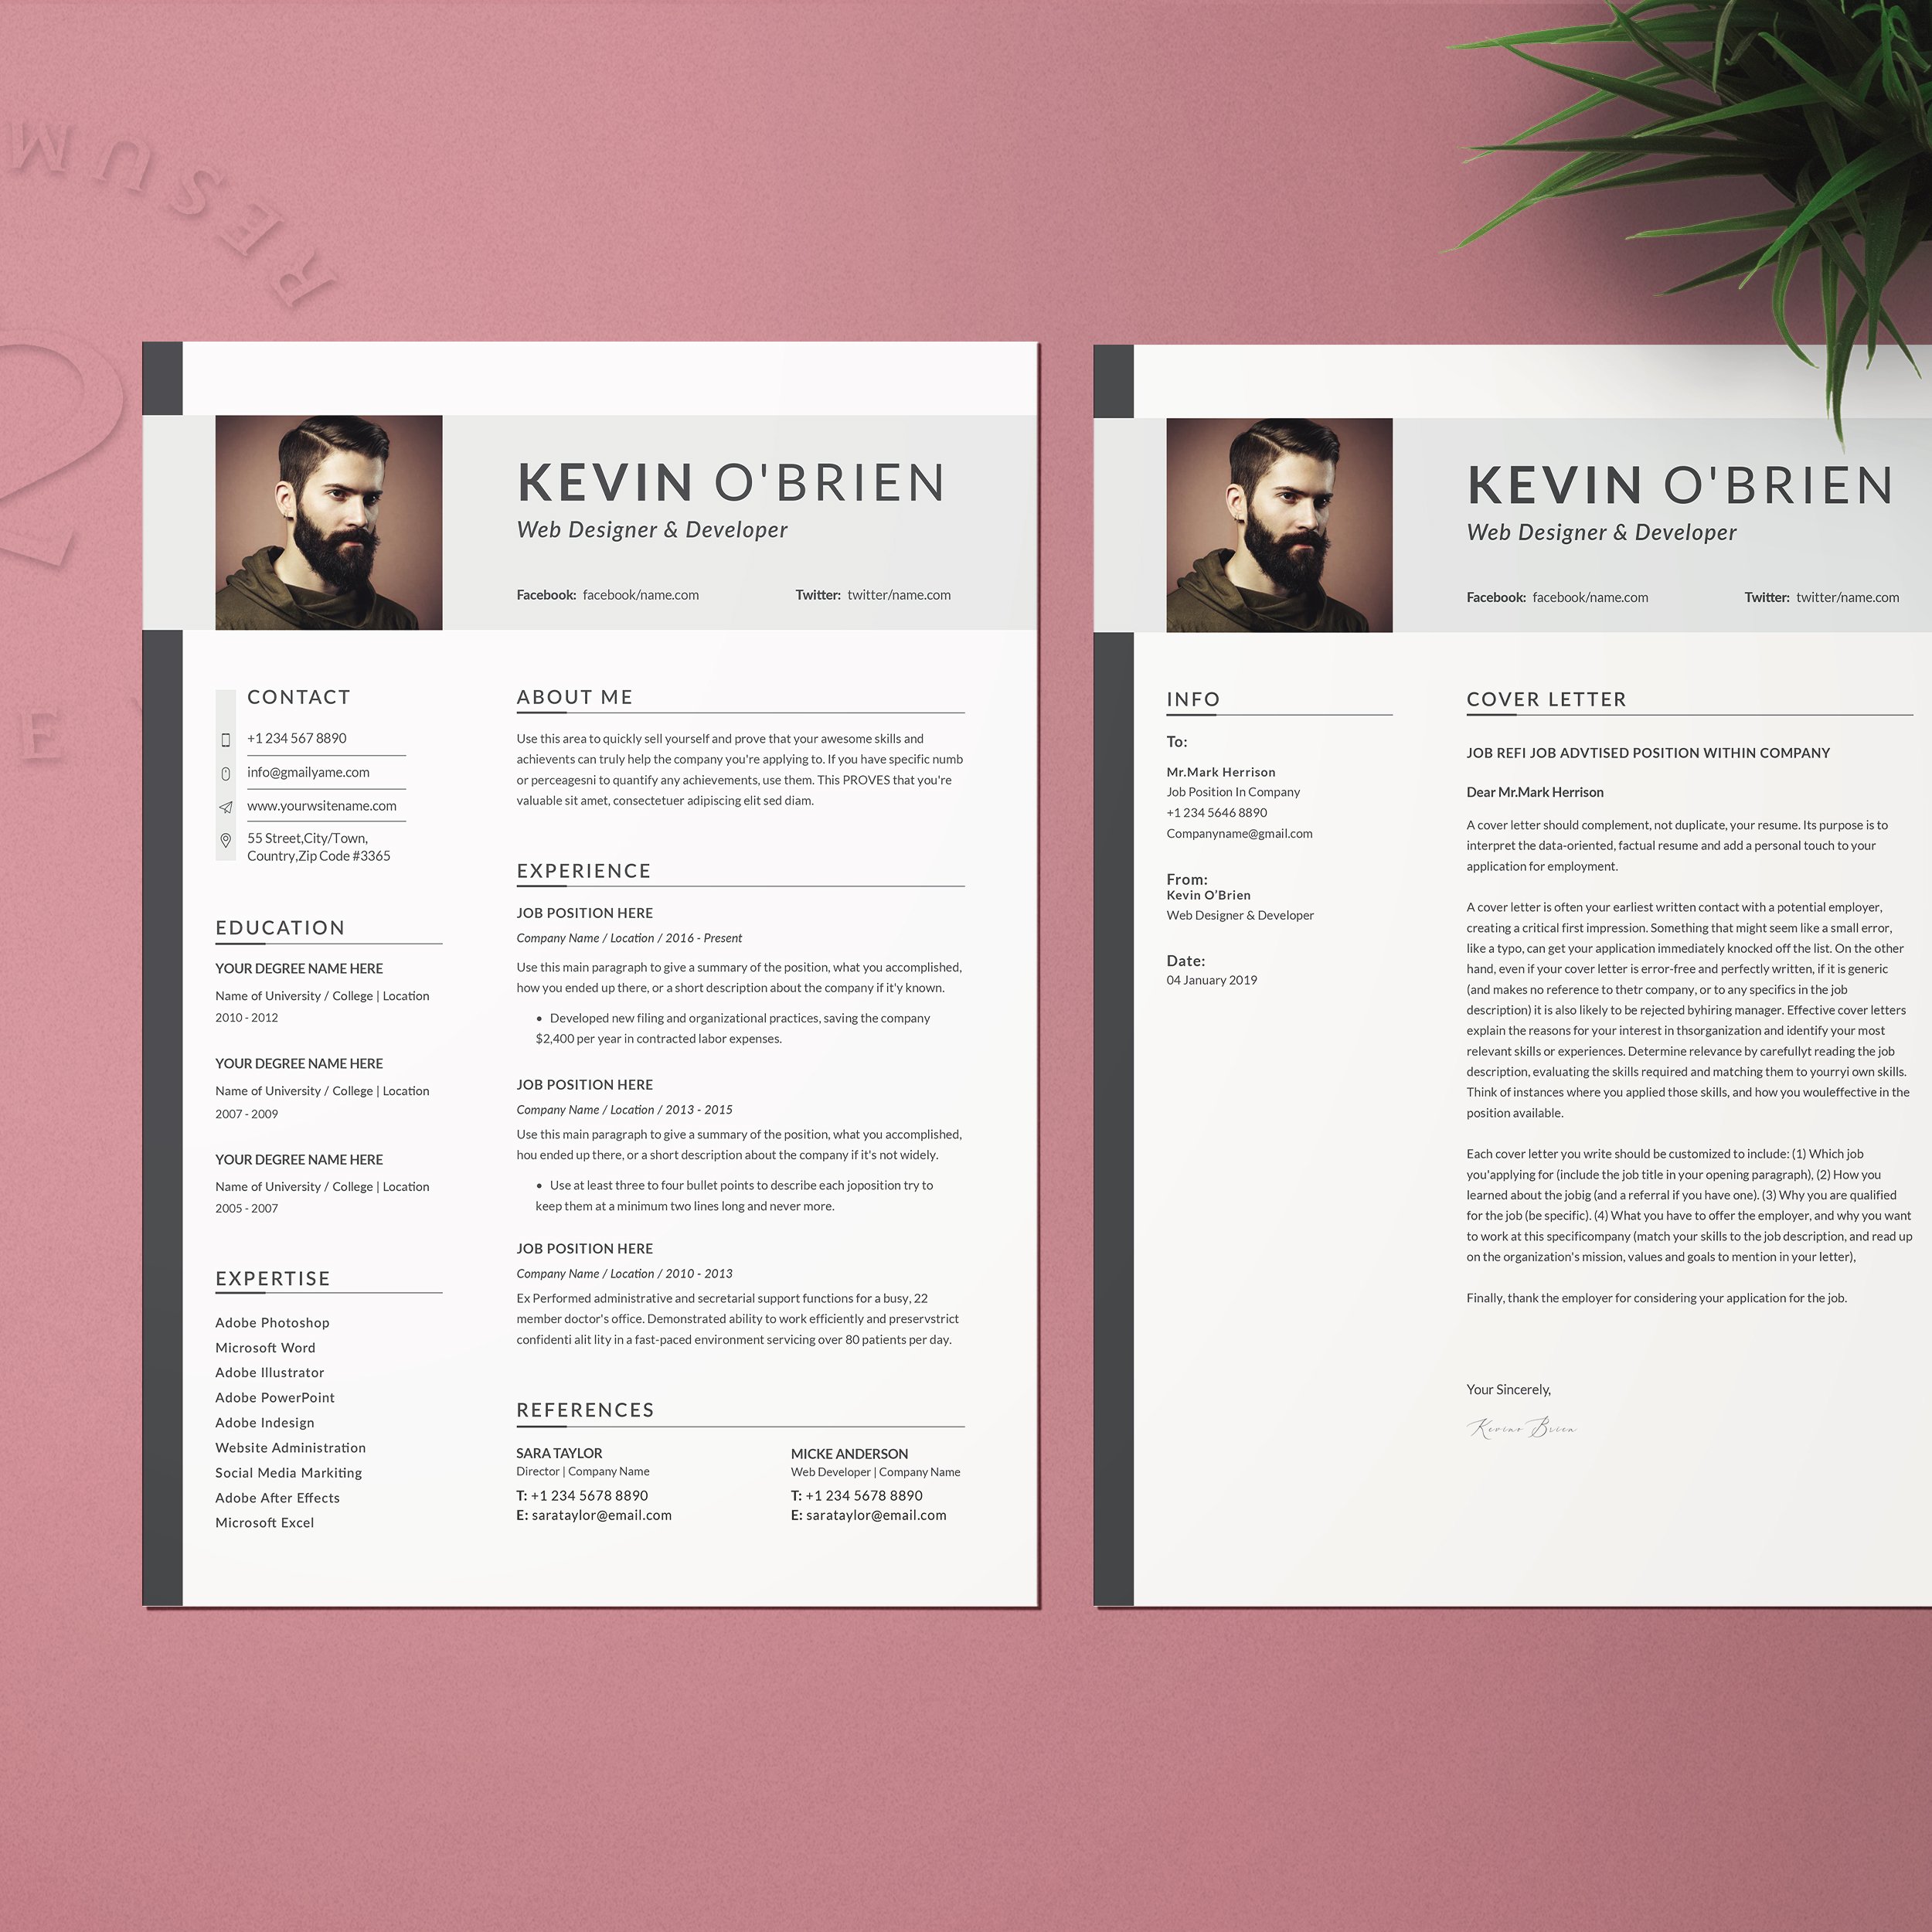 Two professional resumes on a pink background.